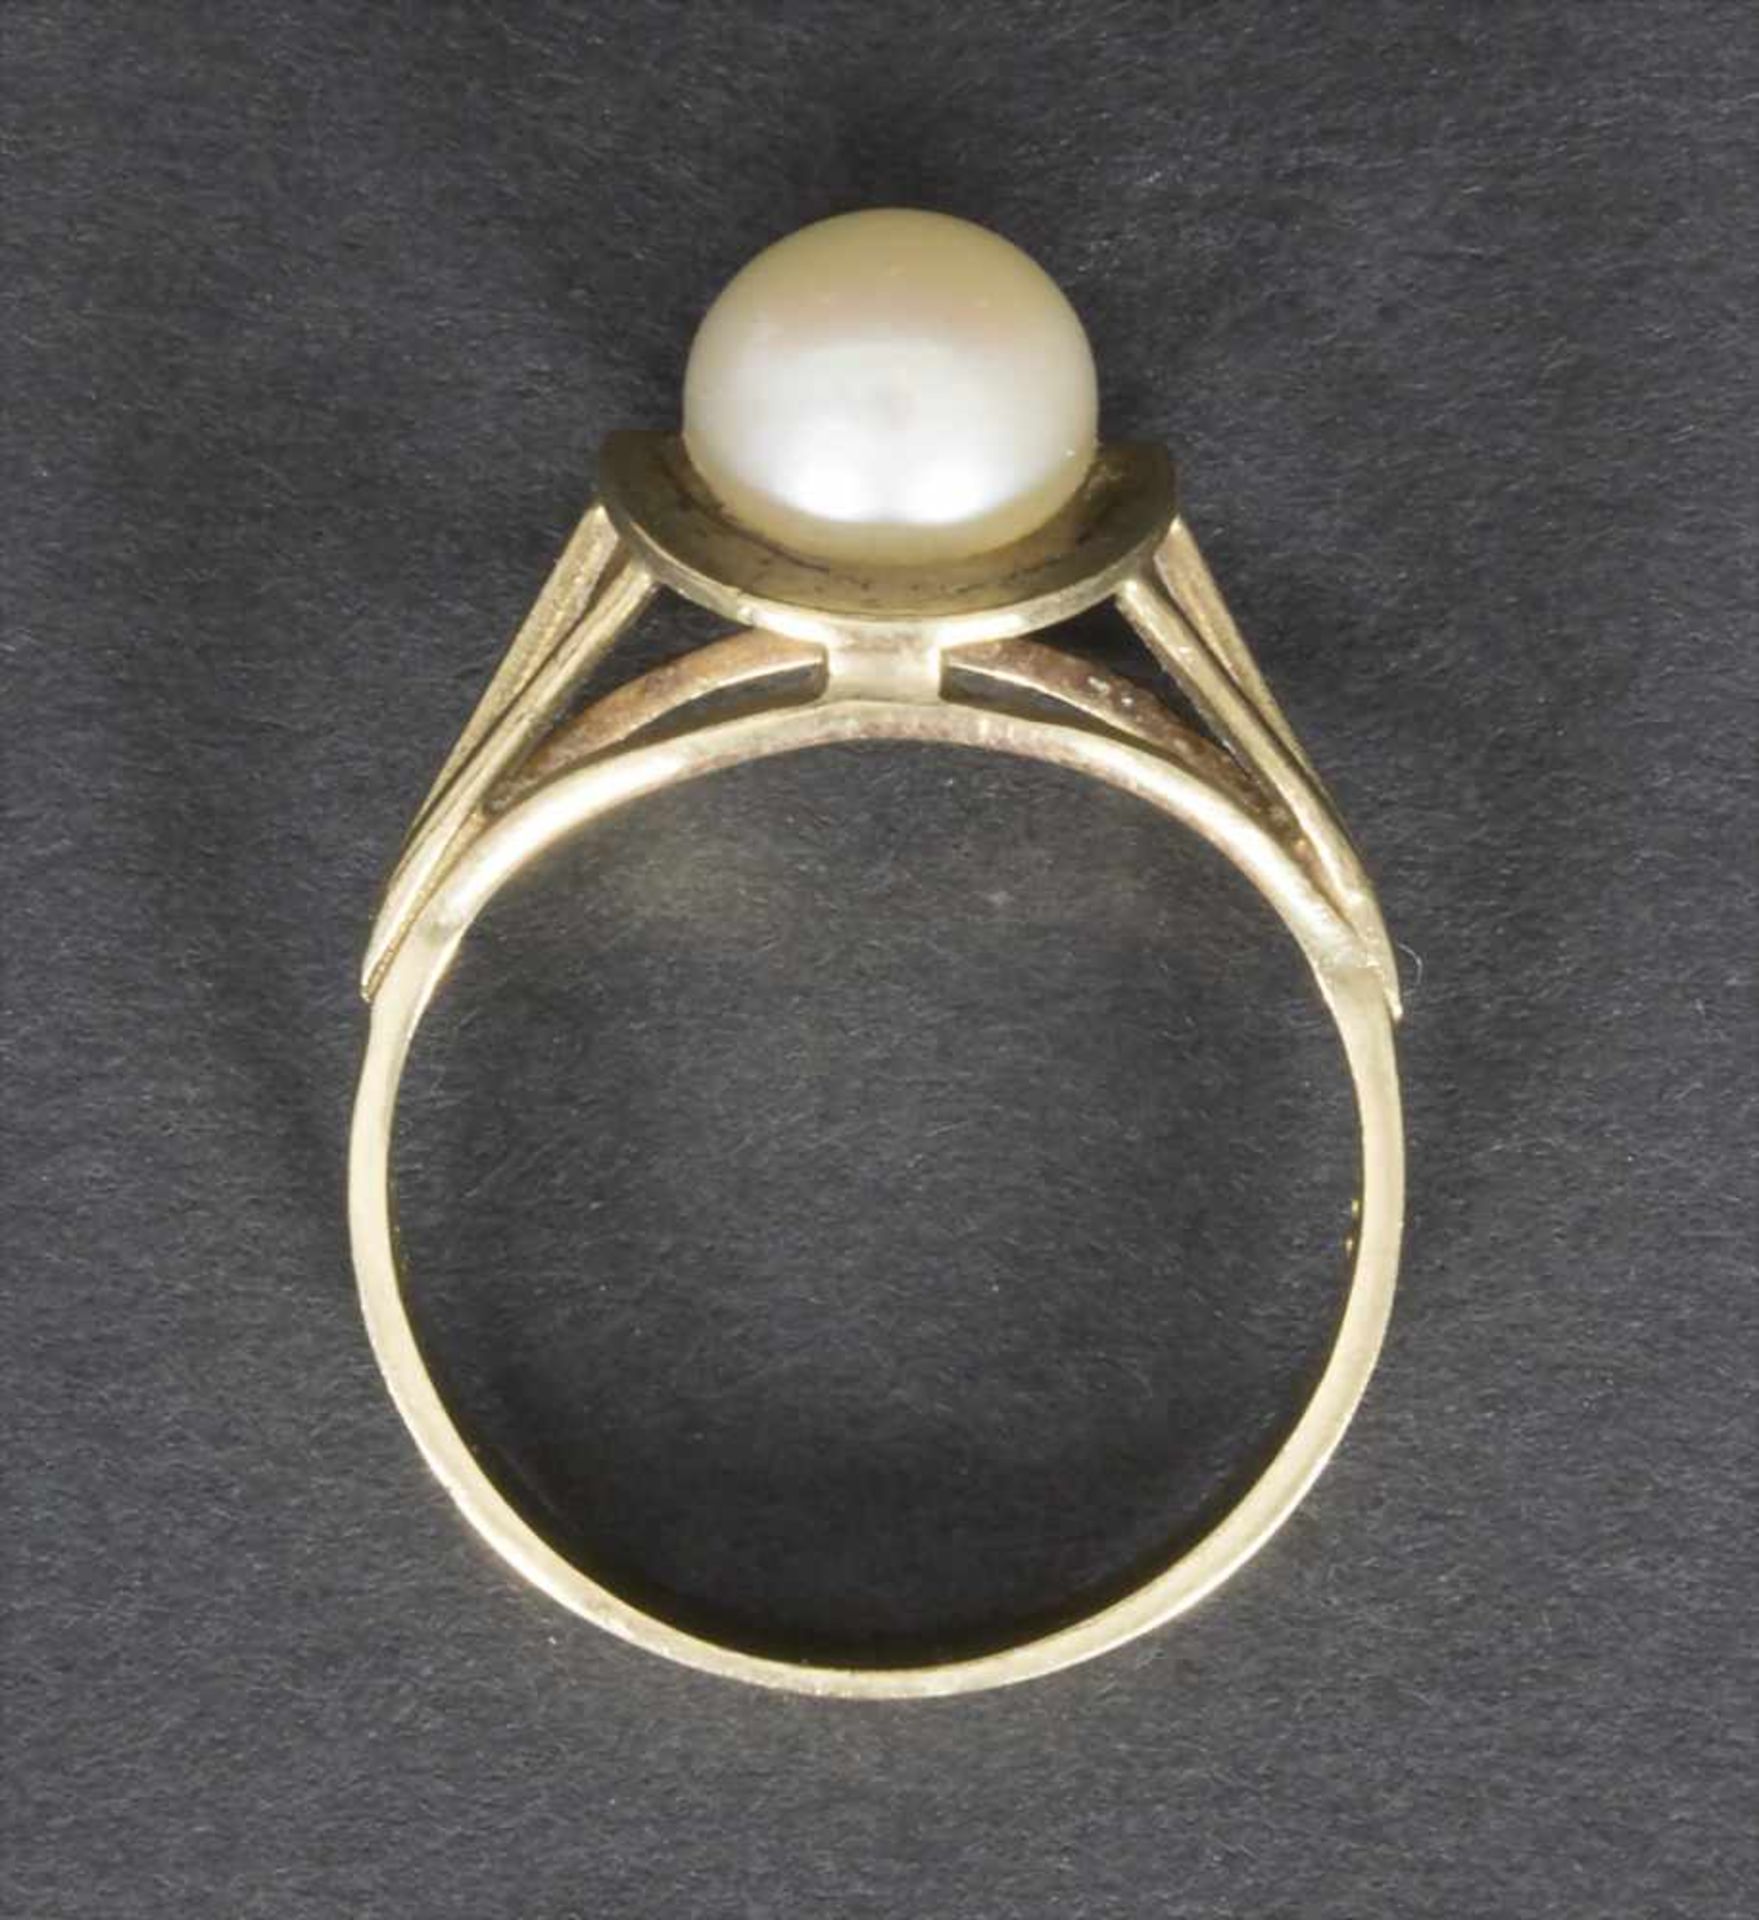 Damenring mit Perle / A ladies ring with a pearlMaterial: 8 Kt.333/000 Gold, Perle,Gewicht: 2,6 g, - Bild 3 aus 3